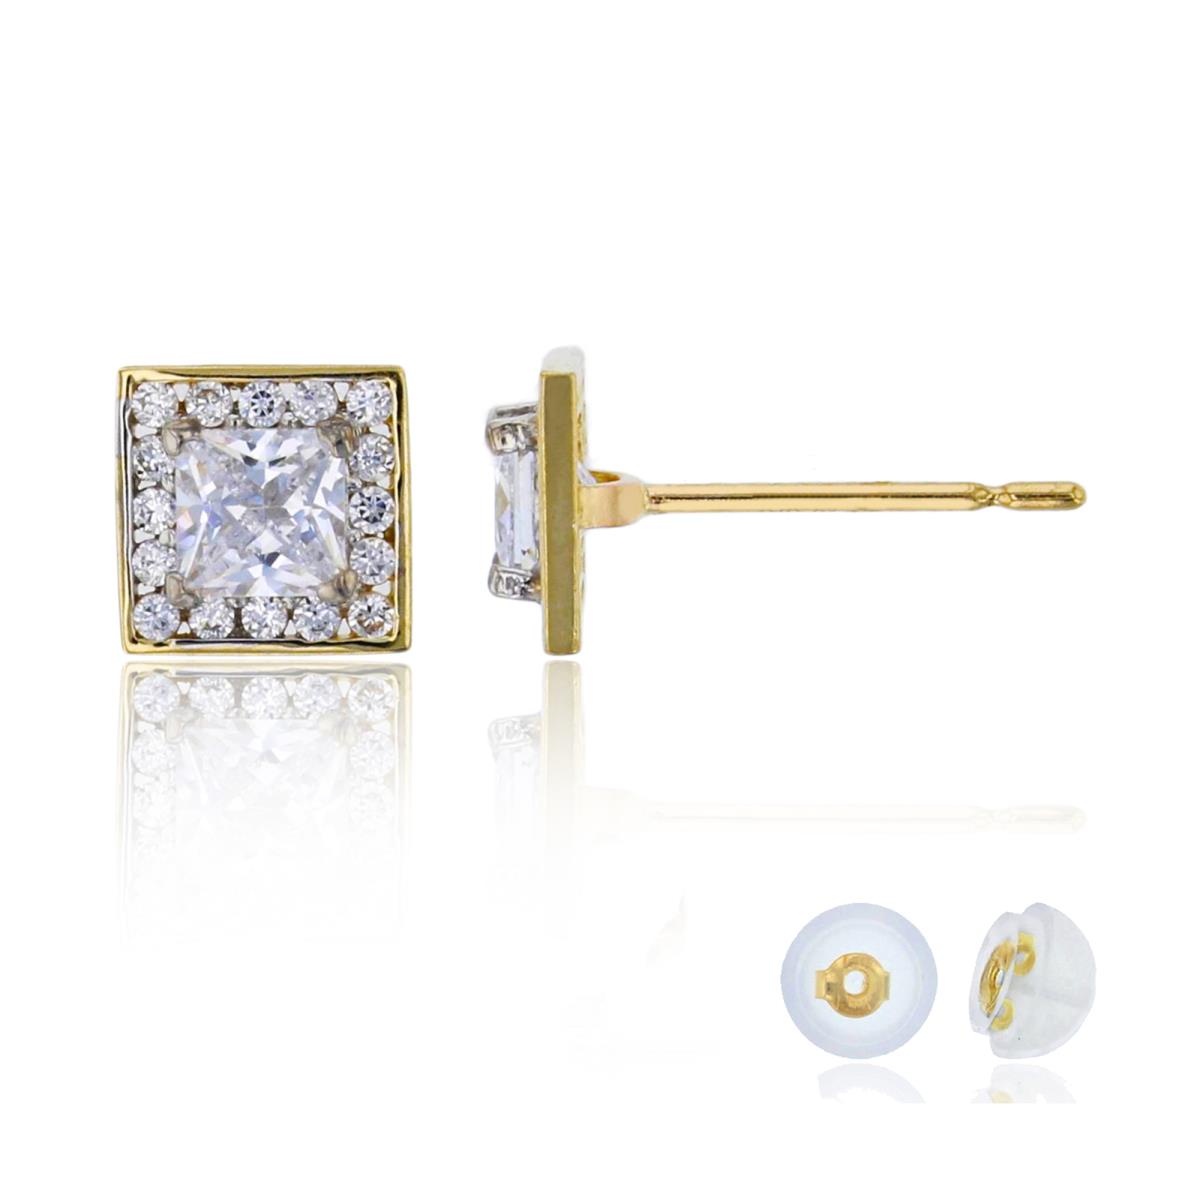 10K Two-Tone Gold 3.5mm Princess Cut Square Stud Earring with Silicone Back